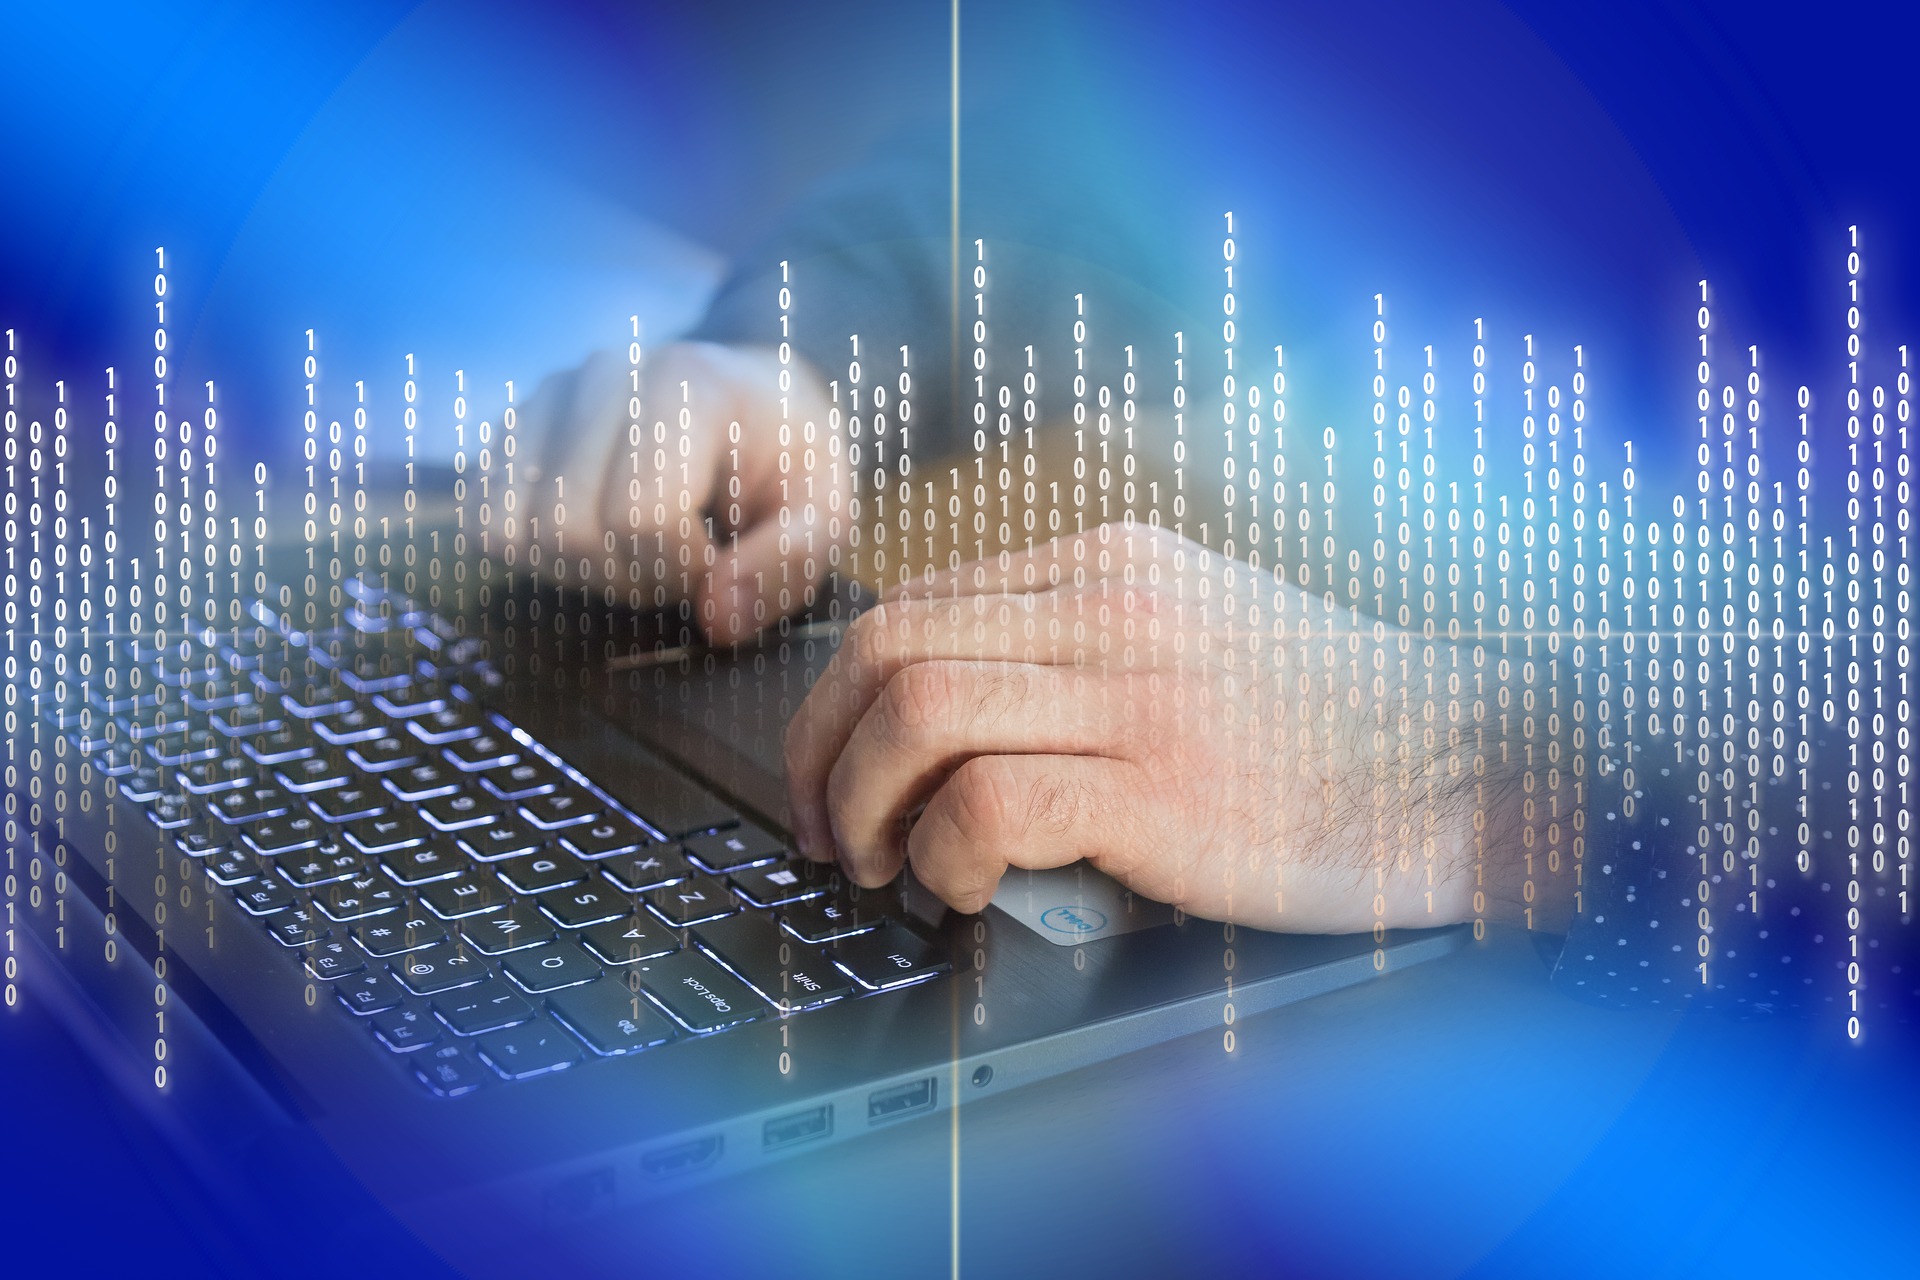 person's hands on a laptop keyboard with blue background with binary numbers